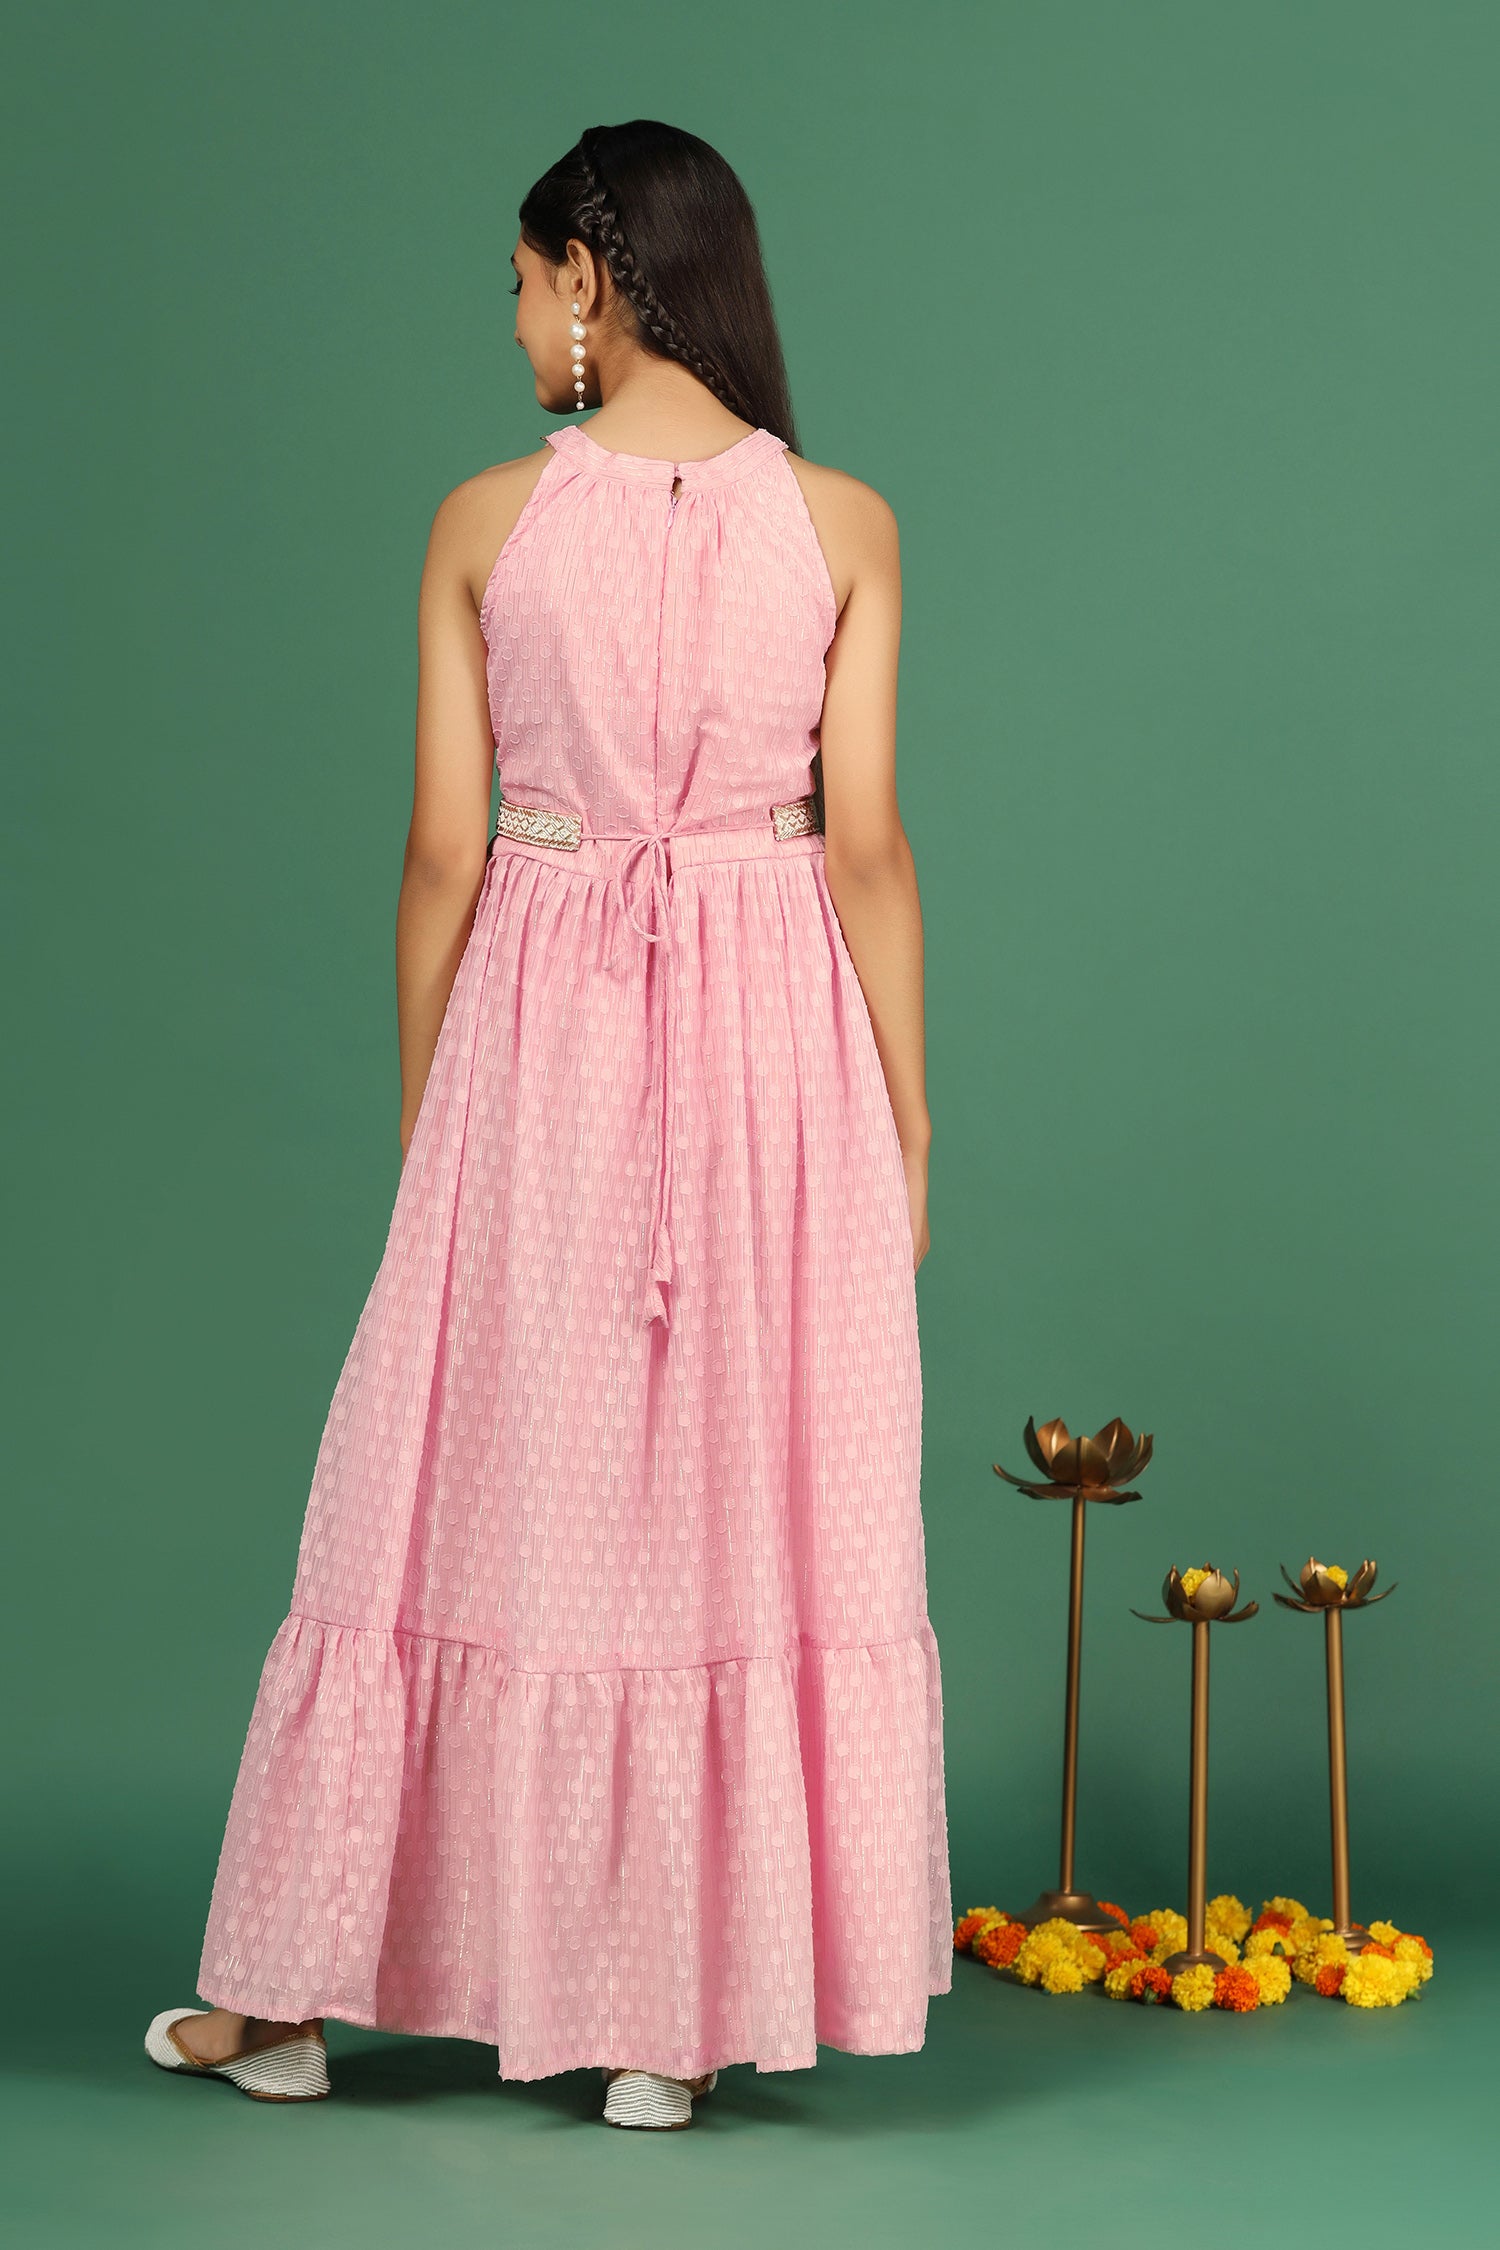 Girl's Pink Maxi Length Dobby Weave Dresses With Embellished Belt - Fashion Dream